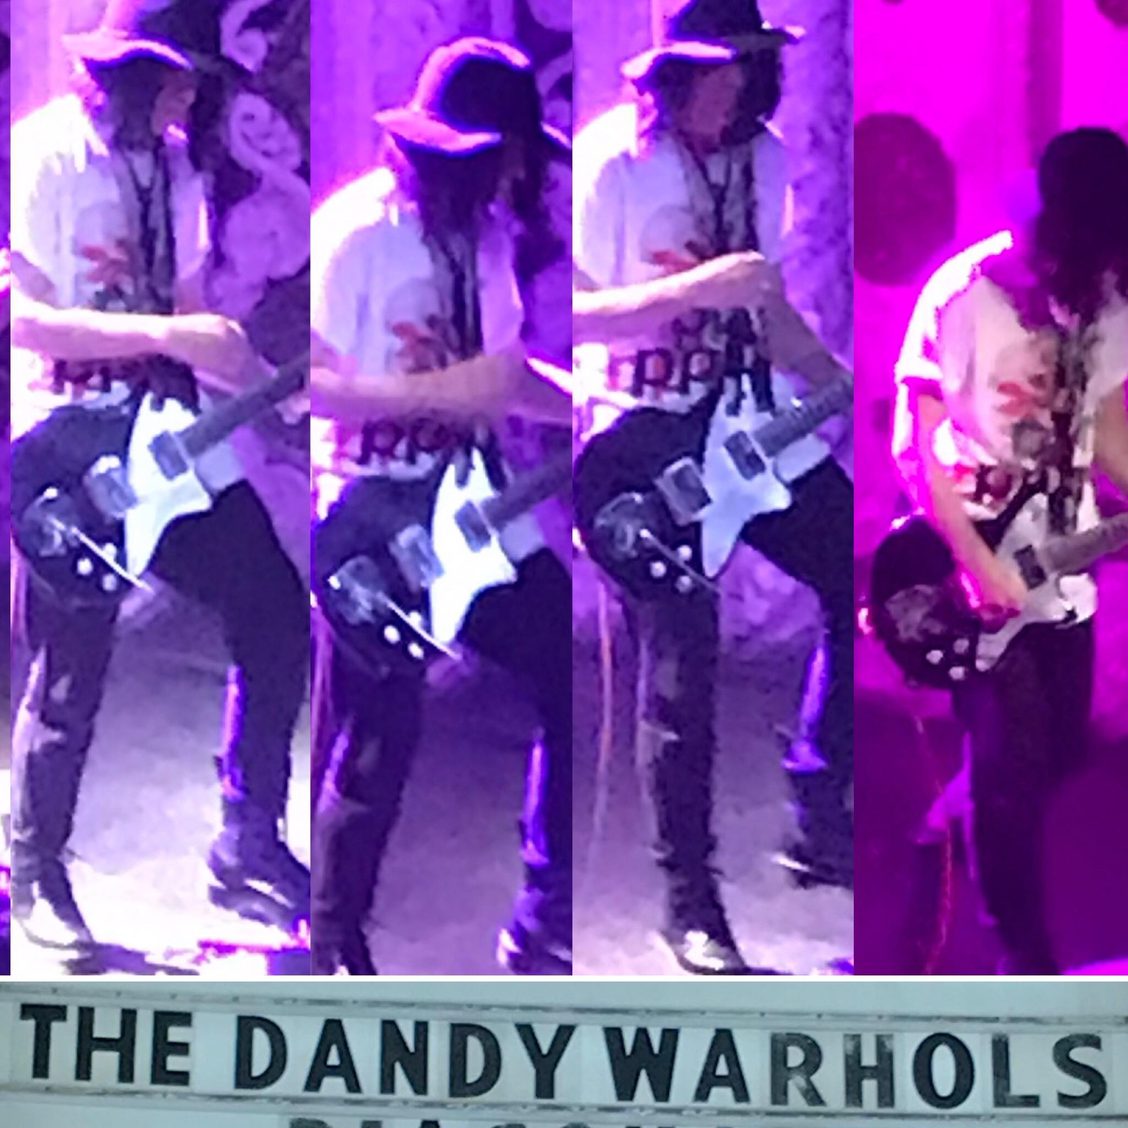 The Dandy Warhols Visit The Museum